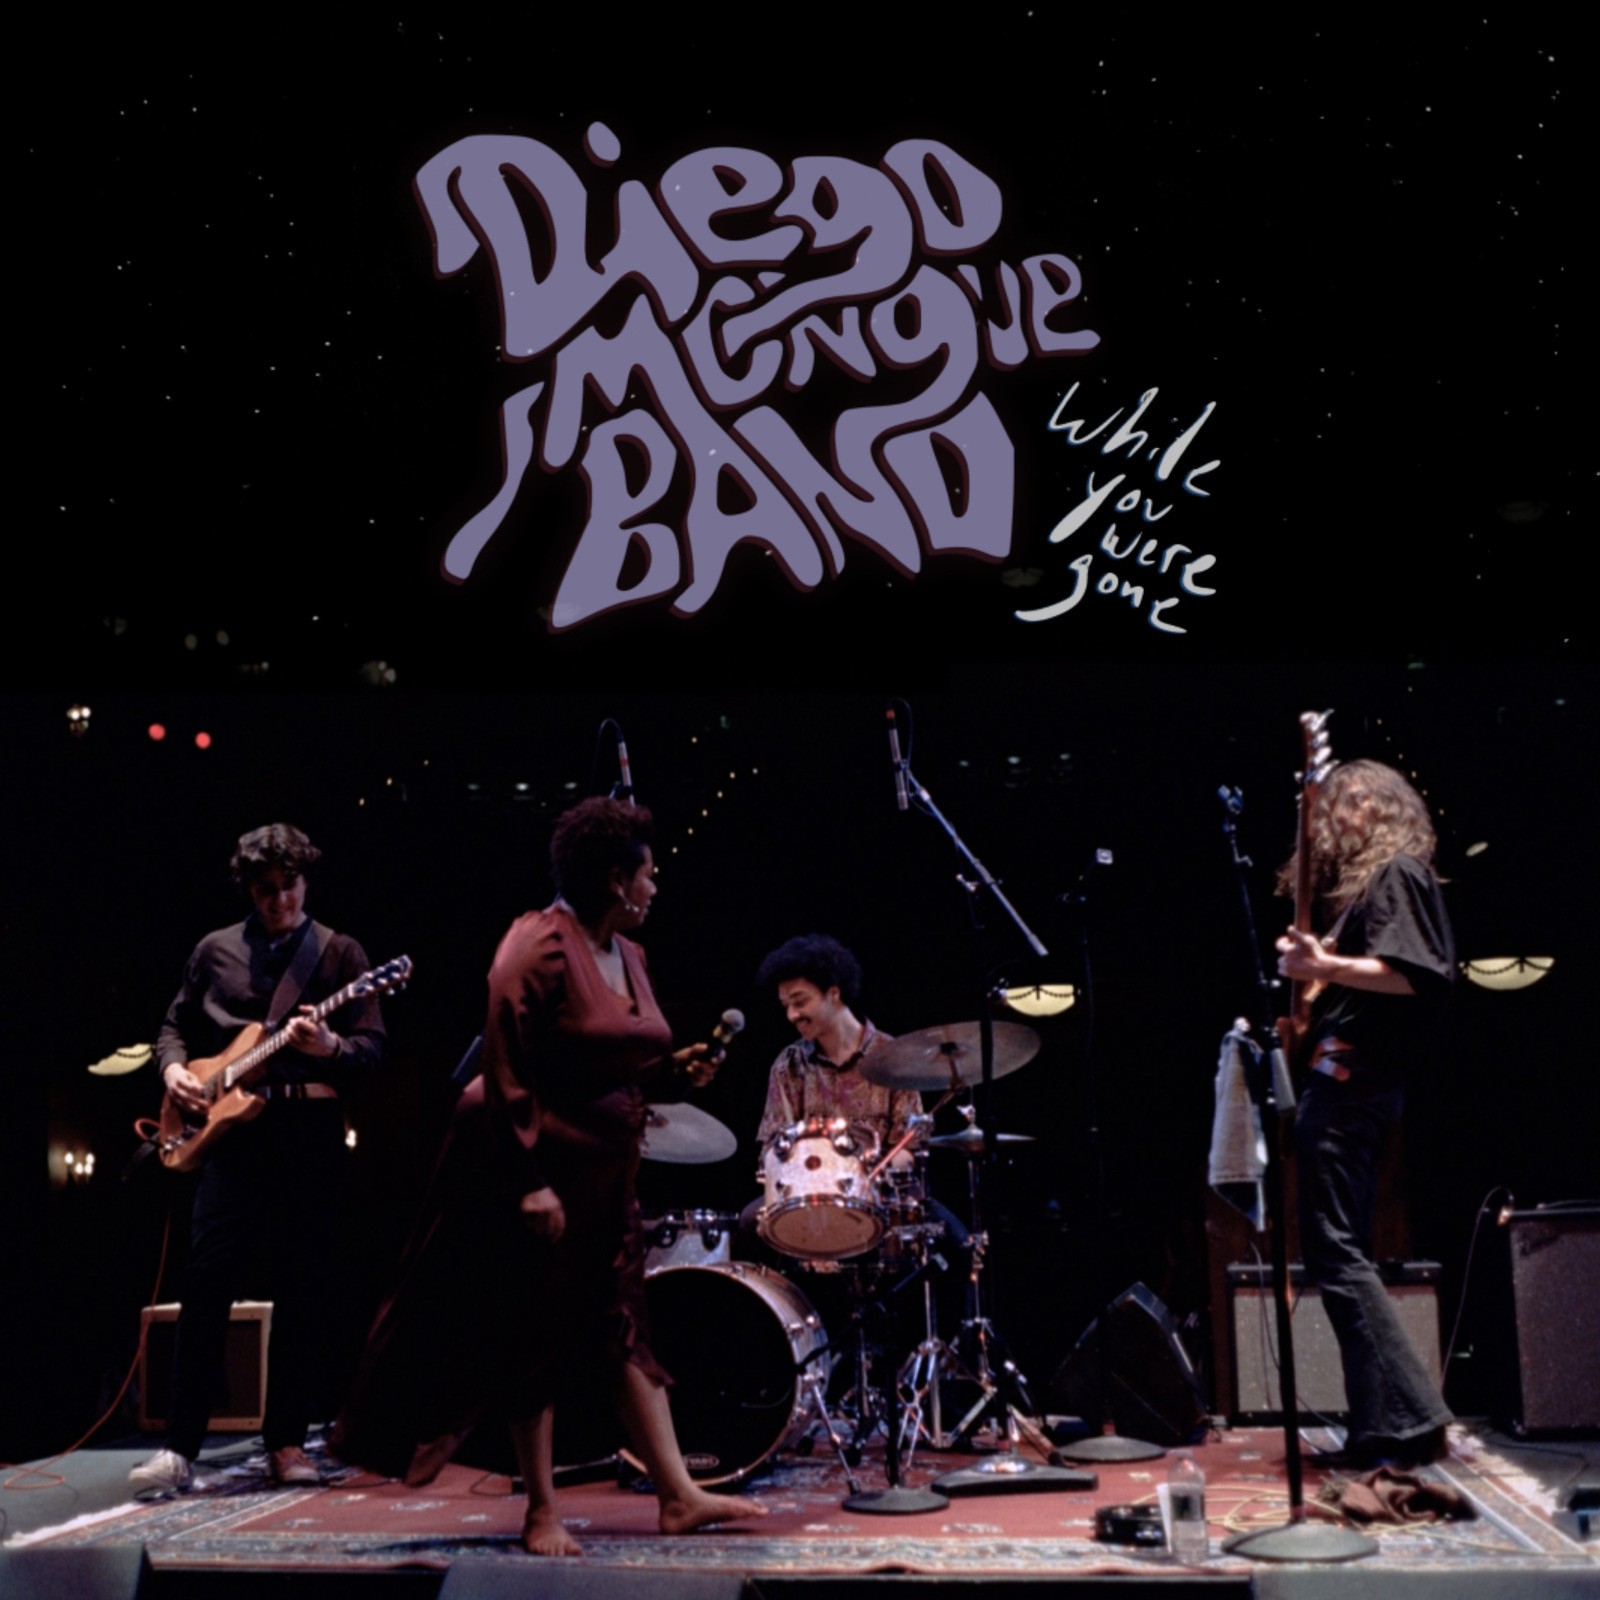 Diego Mongue Band - While You Were Gone